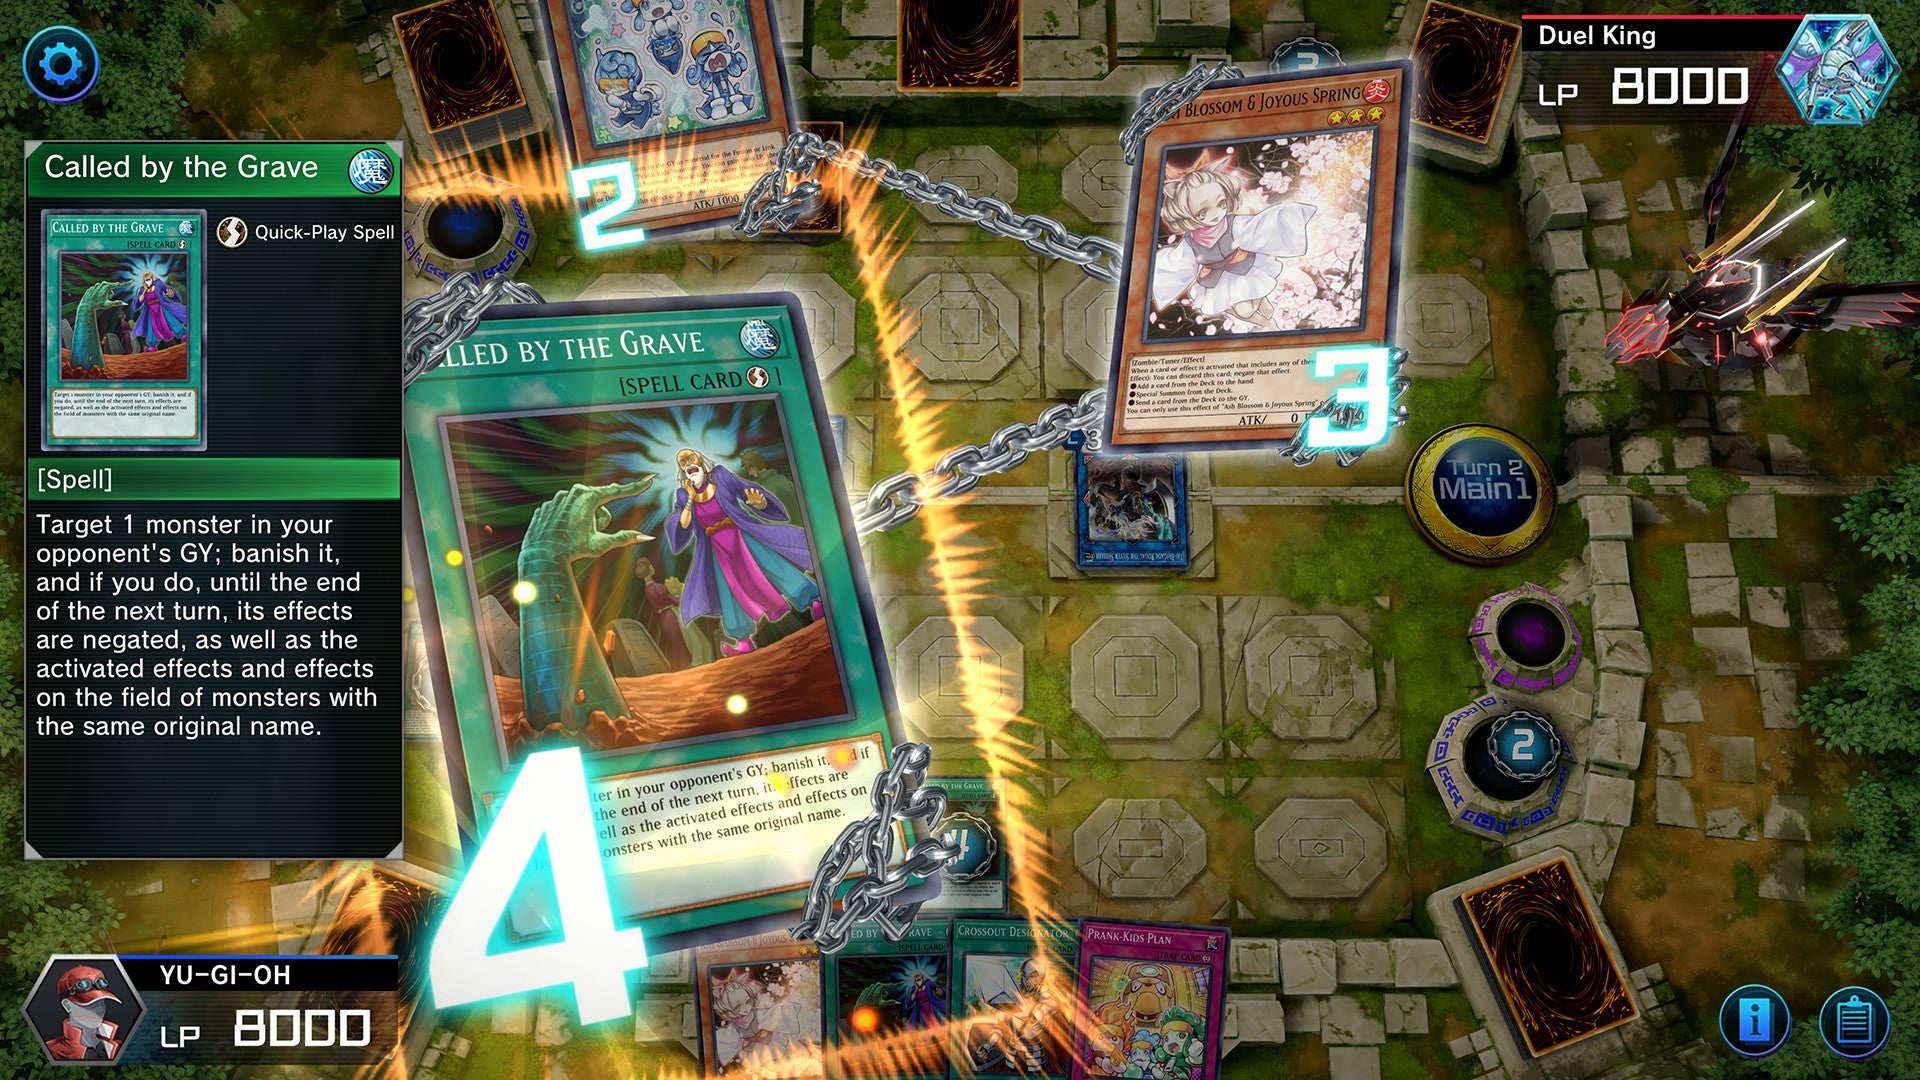 Yu-Gi-Oh Master Duel cards battling, animation has pulled them closer to the screen